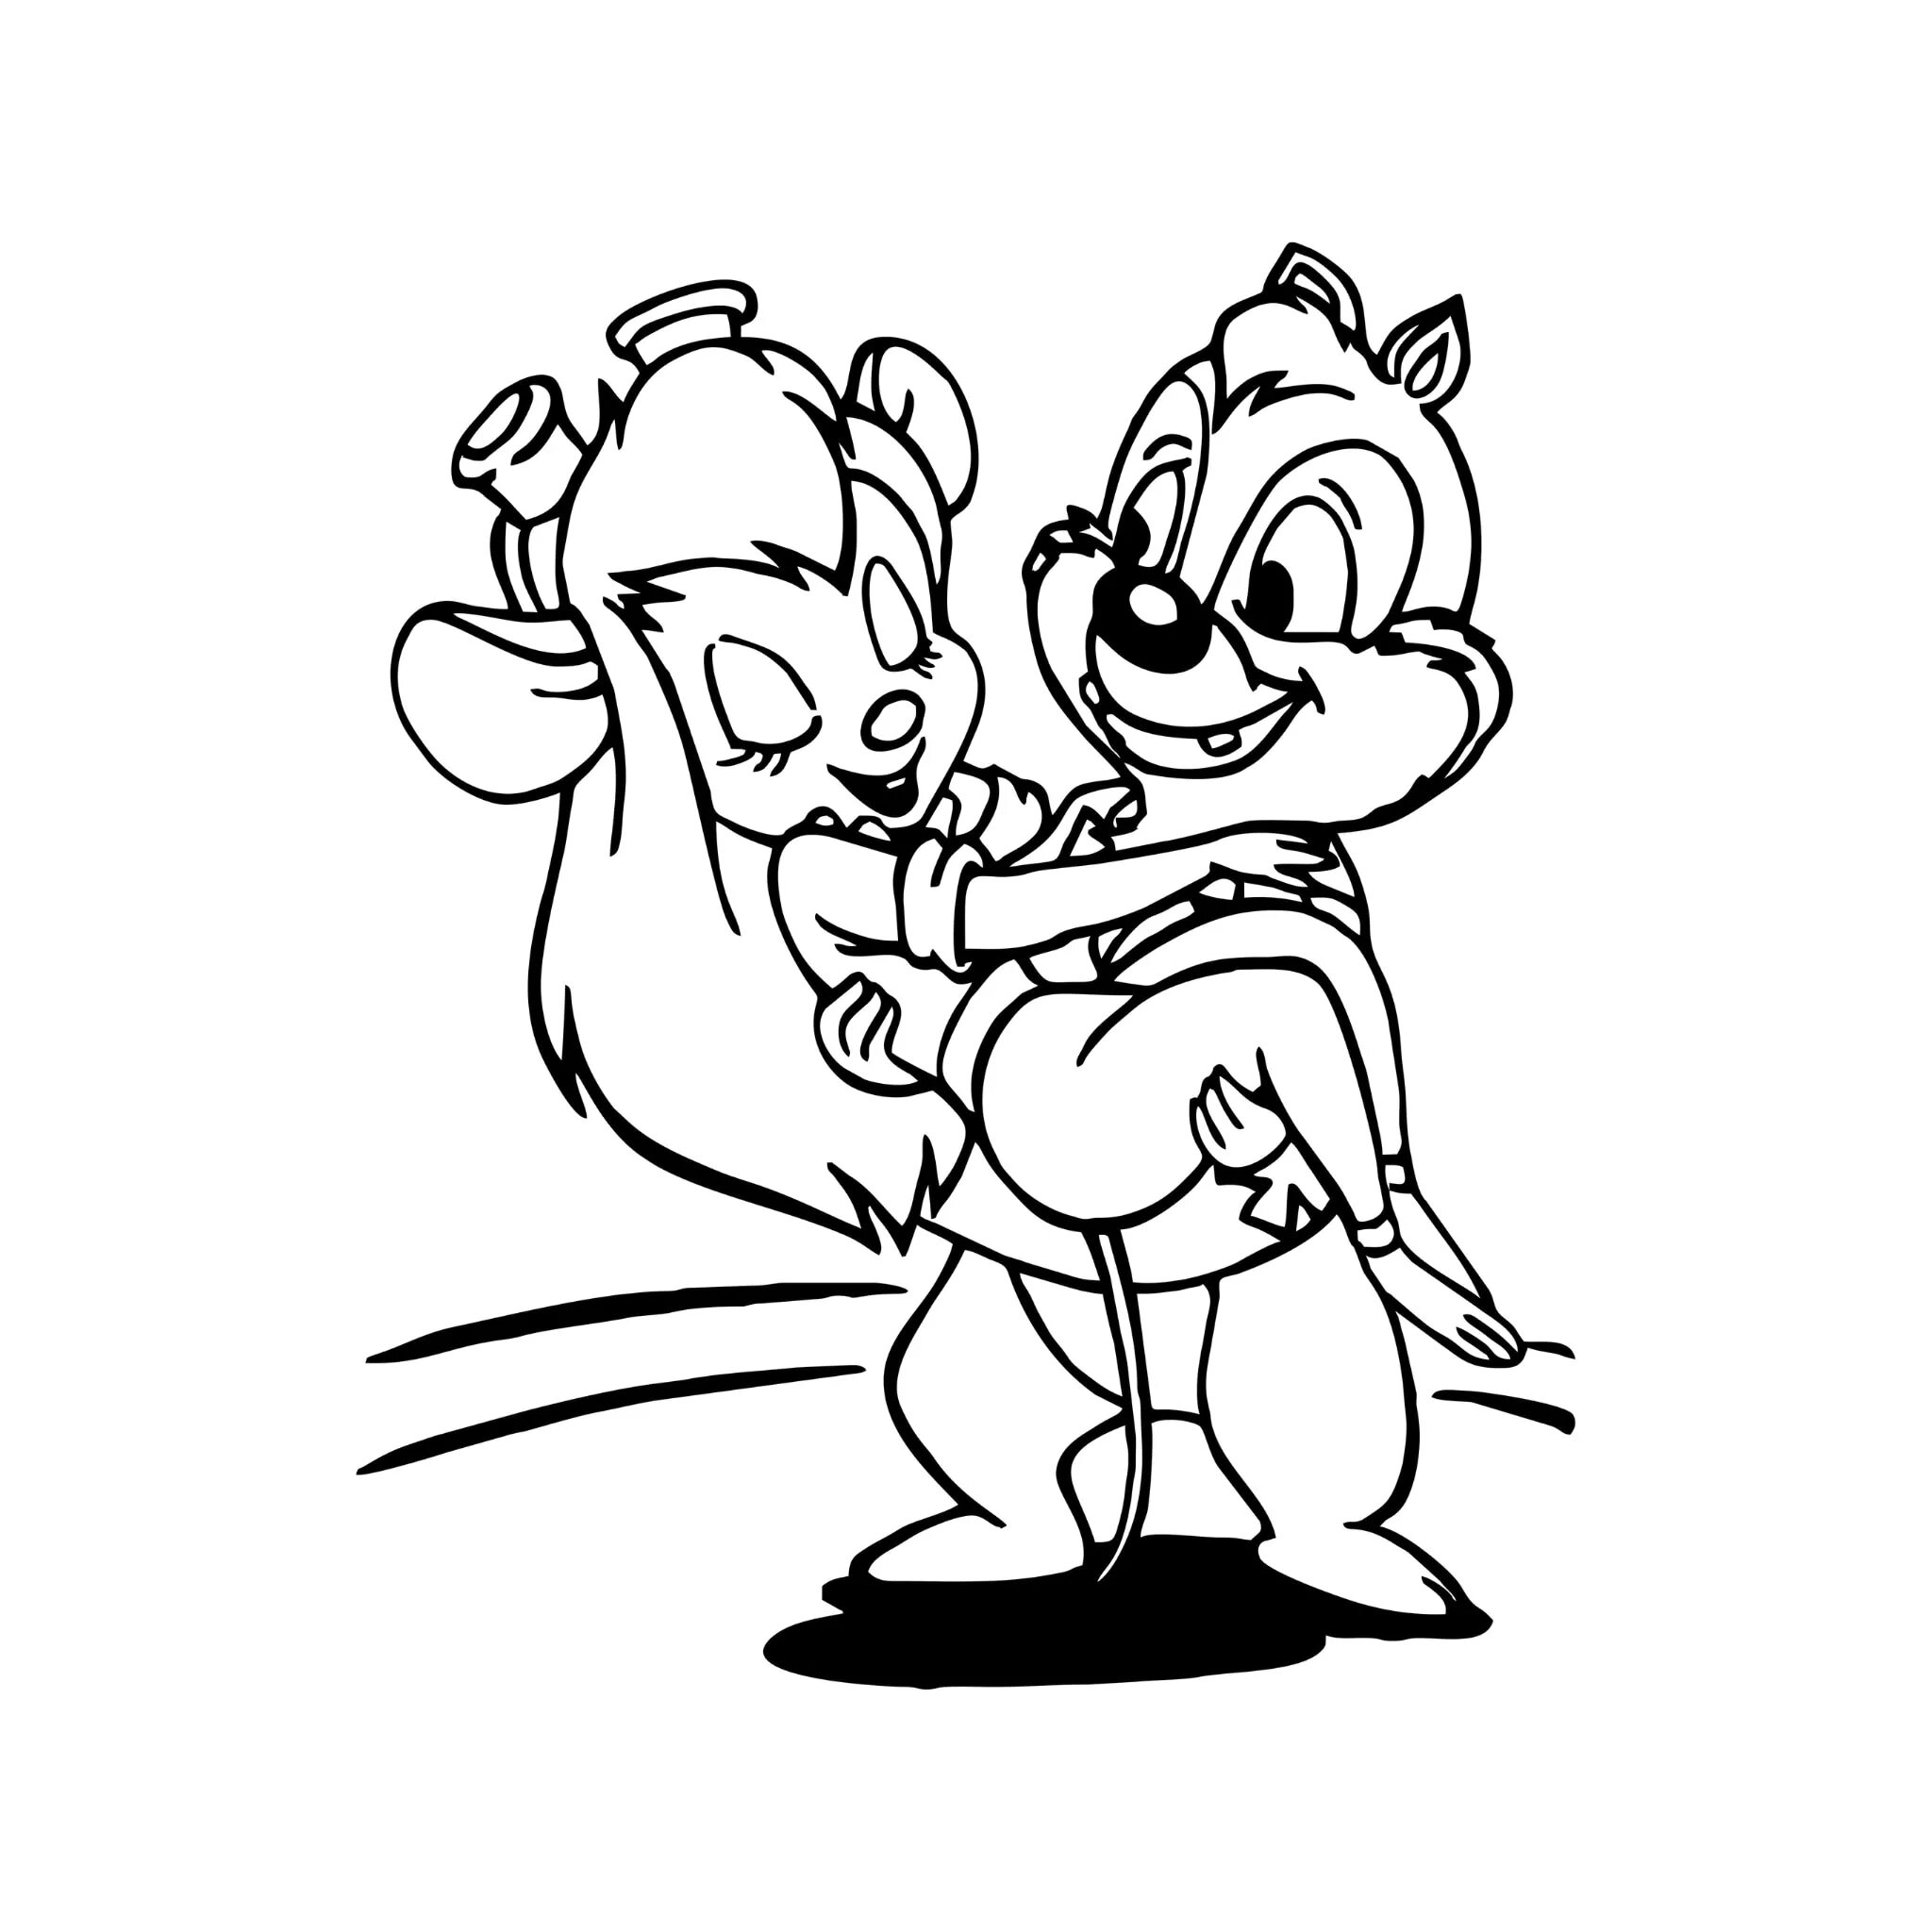 Colourful chip and dale coloring pages for kids